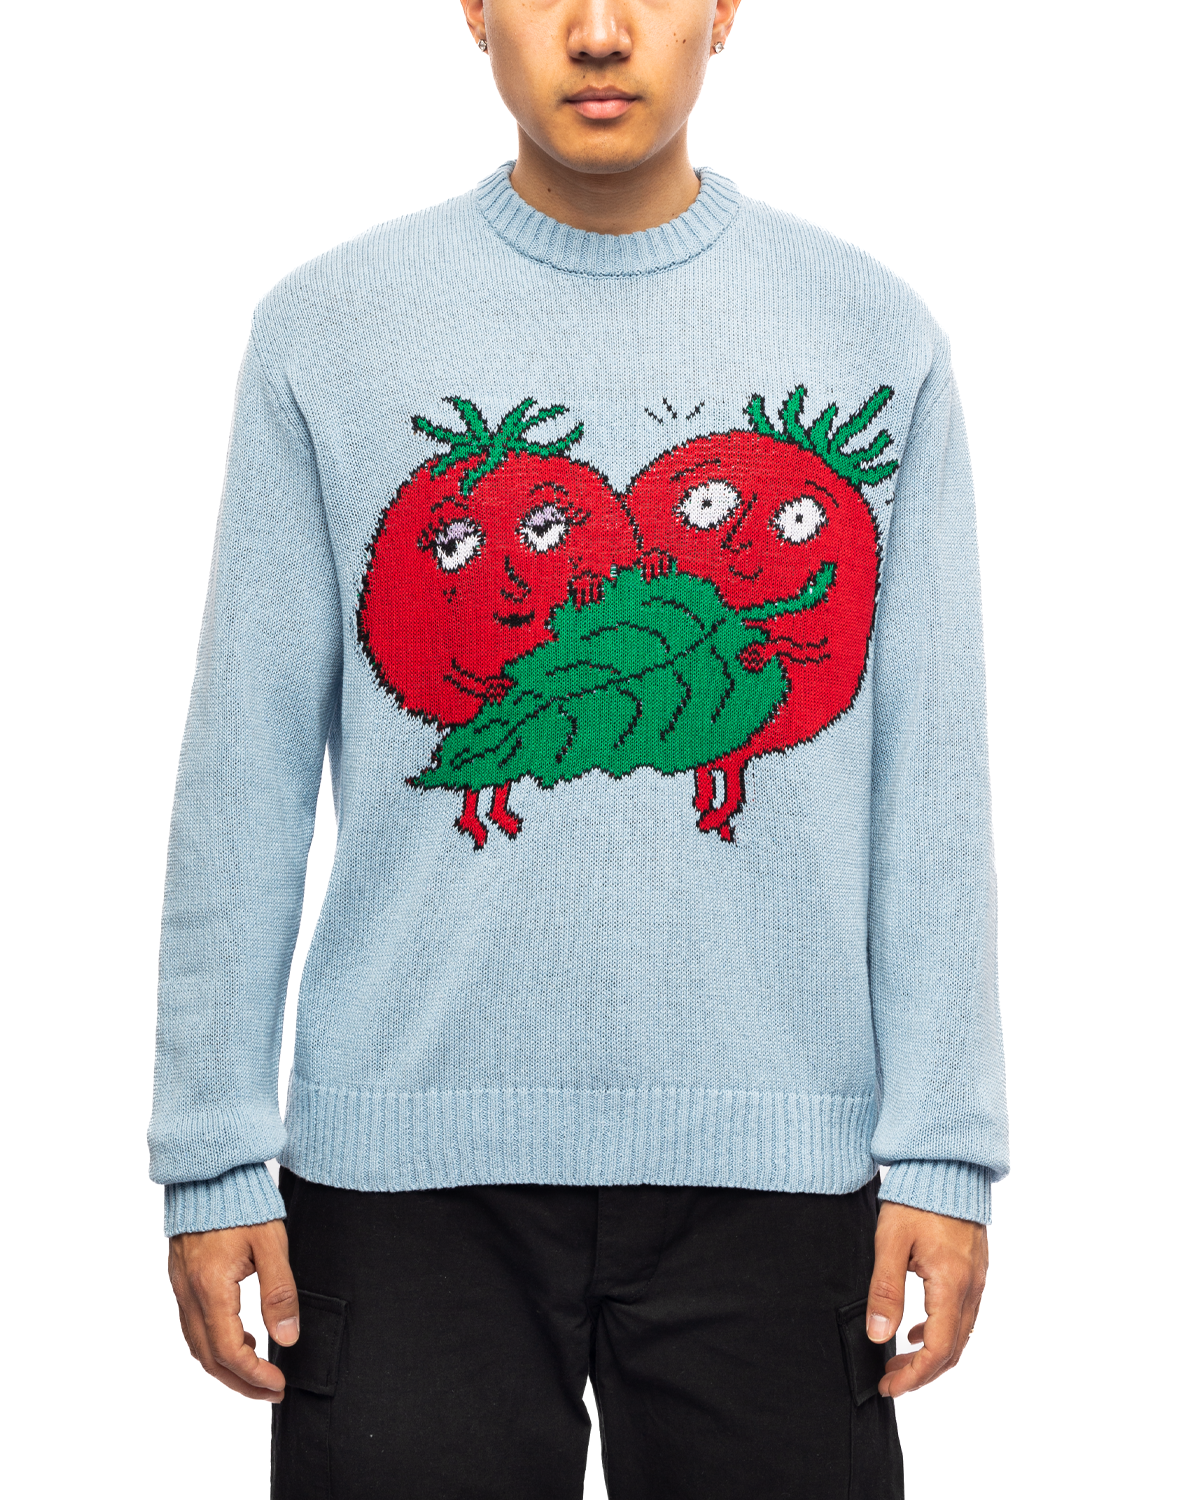 SHF Tomatoes Recycled Cotton Sweater Light Blue